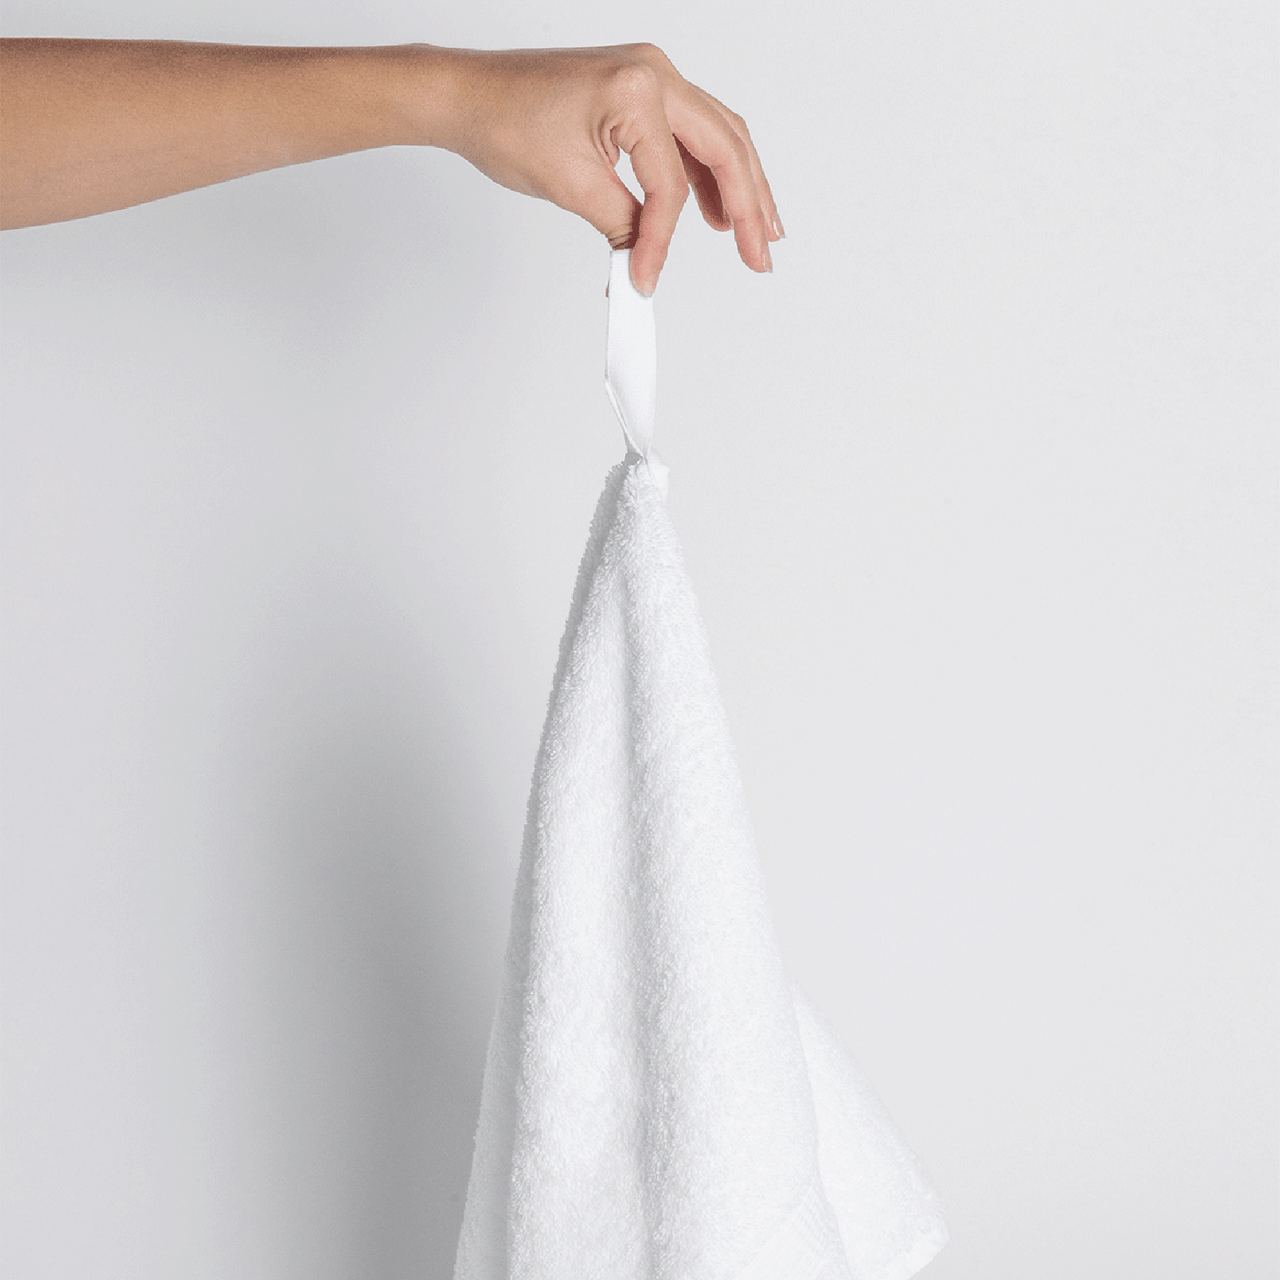 https://cdn11.bigcommerce.com/s-mpfo2gcqca/images/stencil/1280x1280/products/705/3651/nebia-hand_towel-white-hanging-hand__91418.1688576477.png?c=1